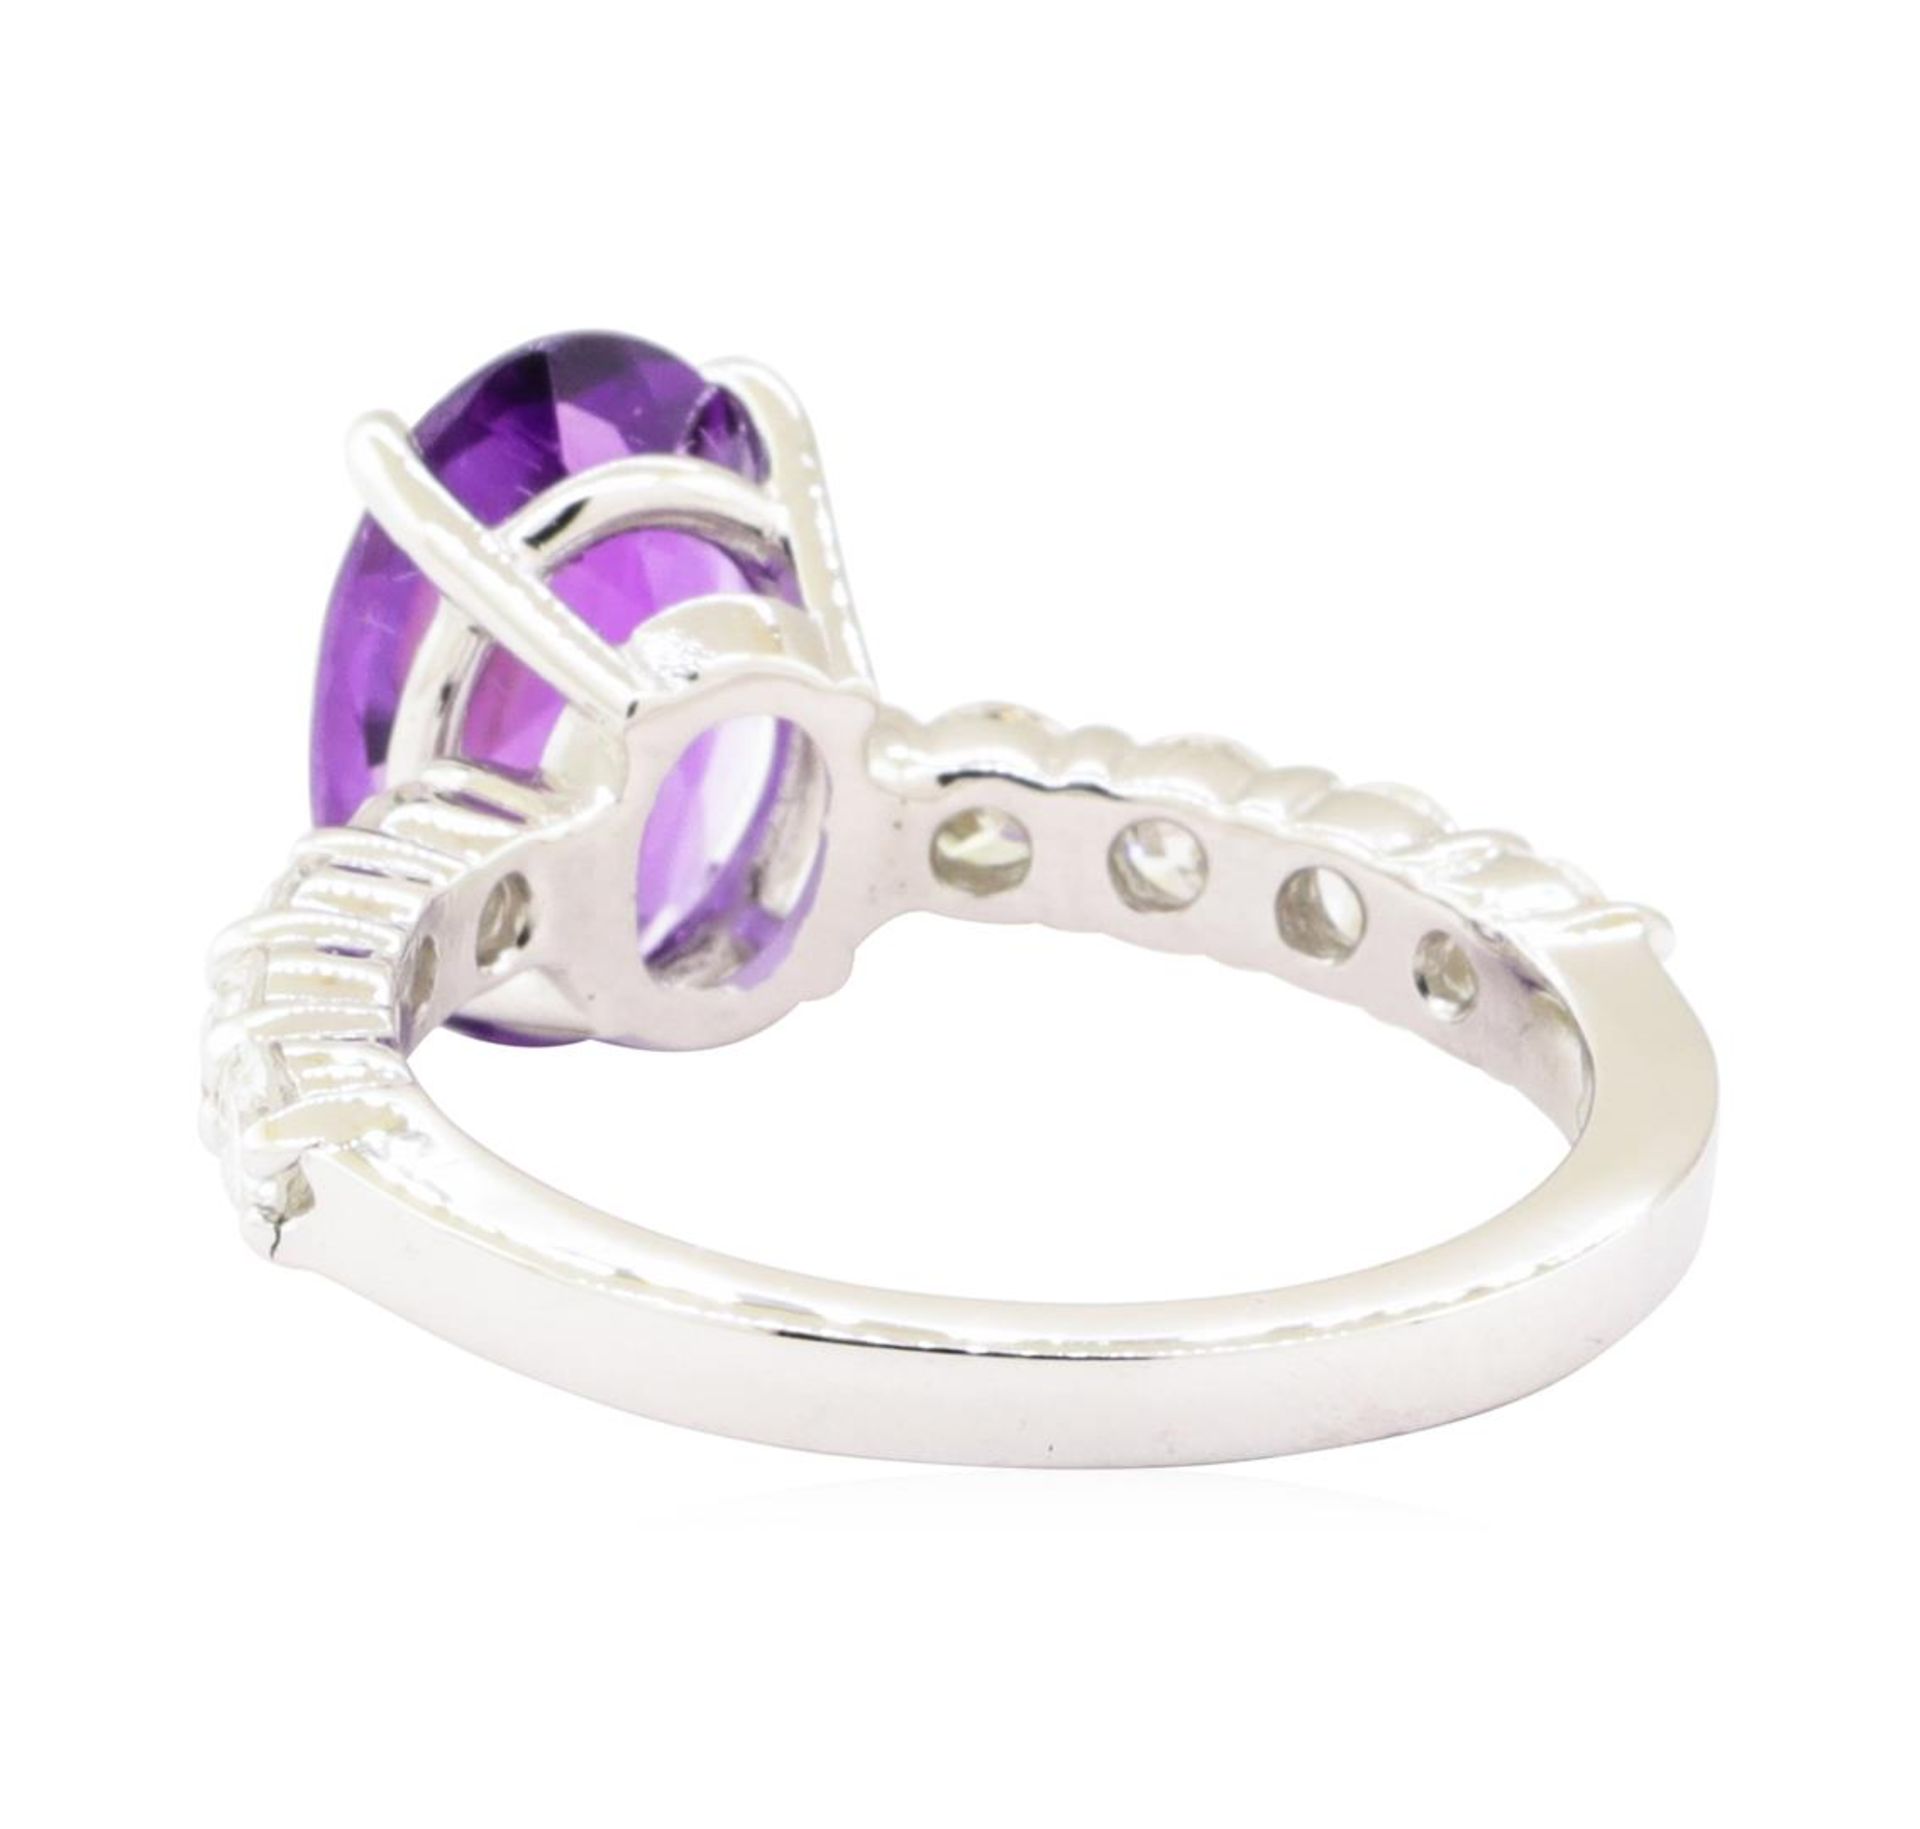 3.10 ctw Amethyst and Diamond Ring - 14KT White Gold - Image 3 of 4